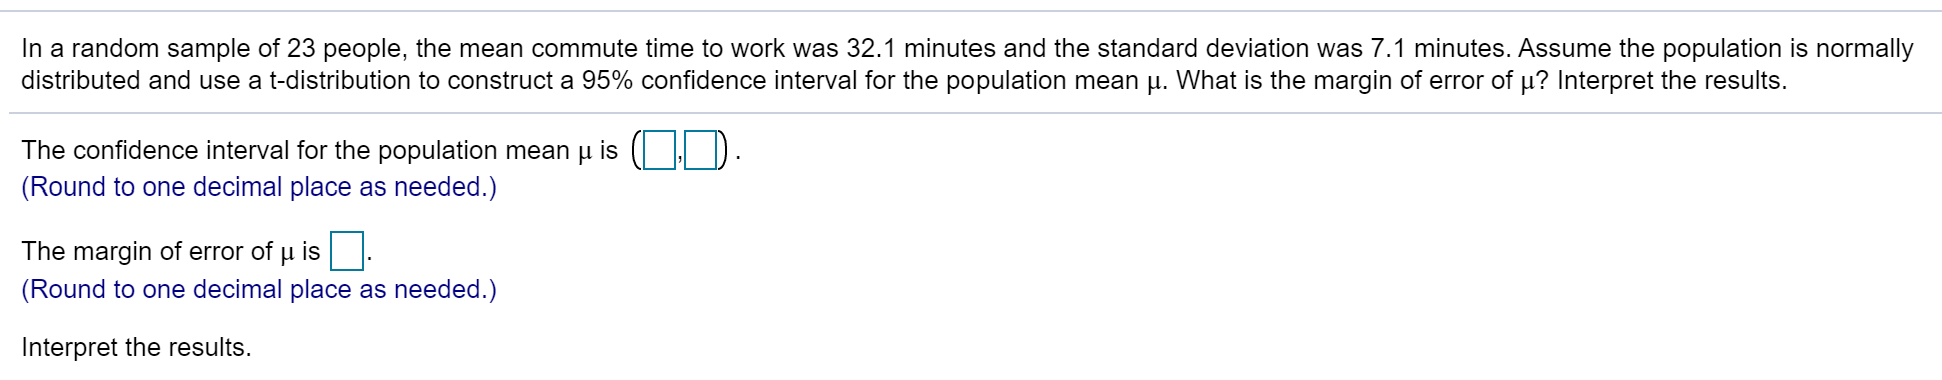 In a random sample of 23 people, the mean commute time to work was 32.1 minutes and the standard deviation was 7.1 minutes. Assume the population is normally
distributed and use a t-distribution to construct a 95% confidence interval for the population mean p. What is the margin of error of µ? Interpret the results.
The confidence interval for the population mean µ is ( | D.
(Round to one decimal place as needed.)
The margin of error of u is
(Round to one decimal place as needed.)
Interpret the results.
